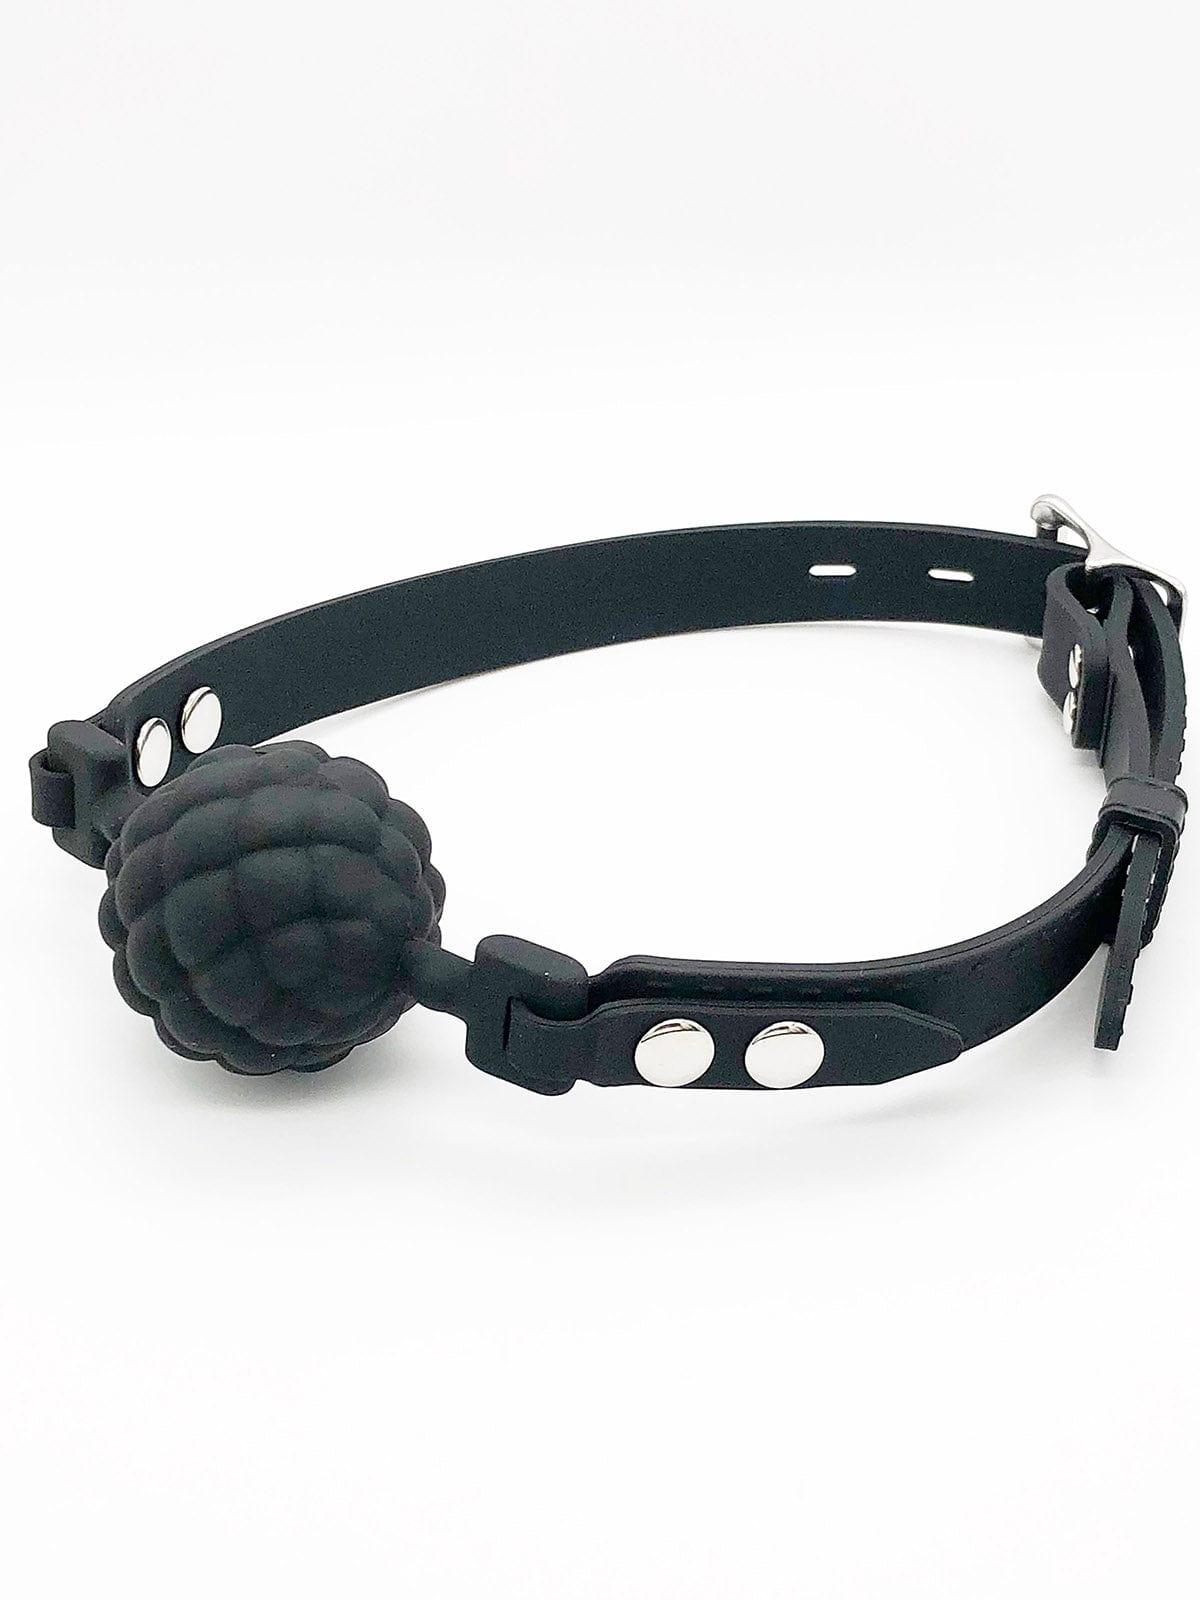 SILICONE TEXTURED SOLID BALL GAG - FullKit.com